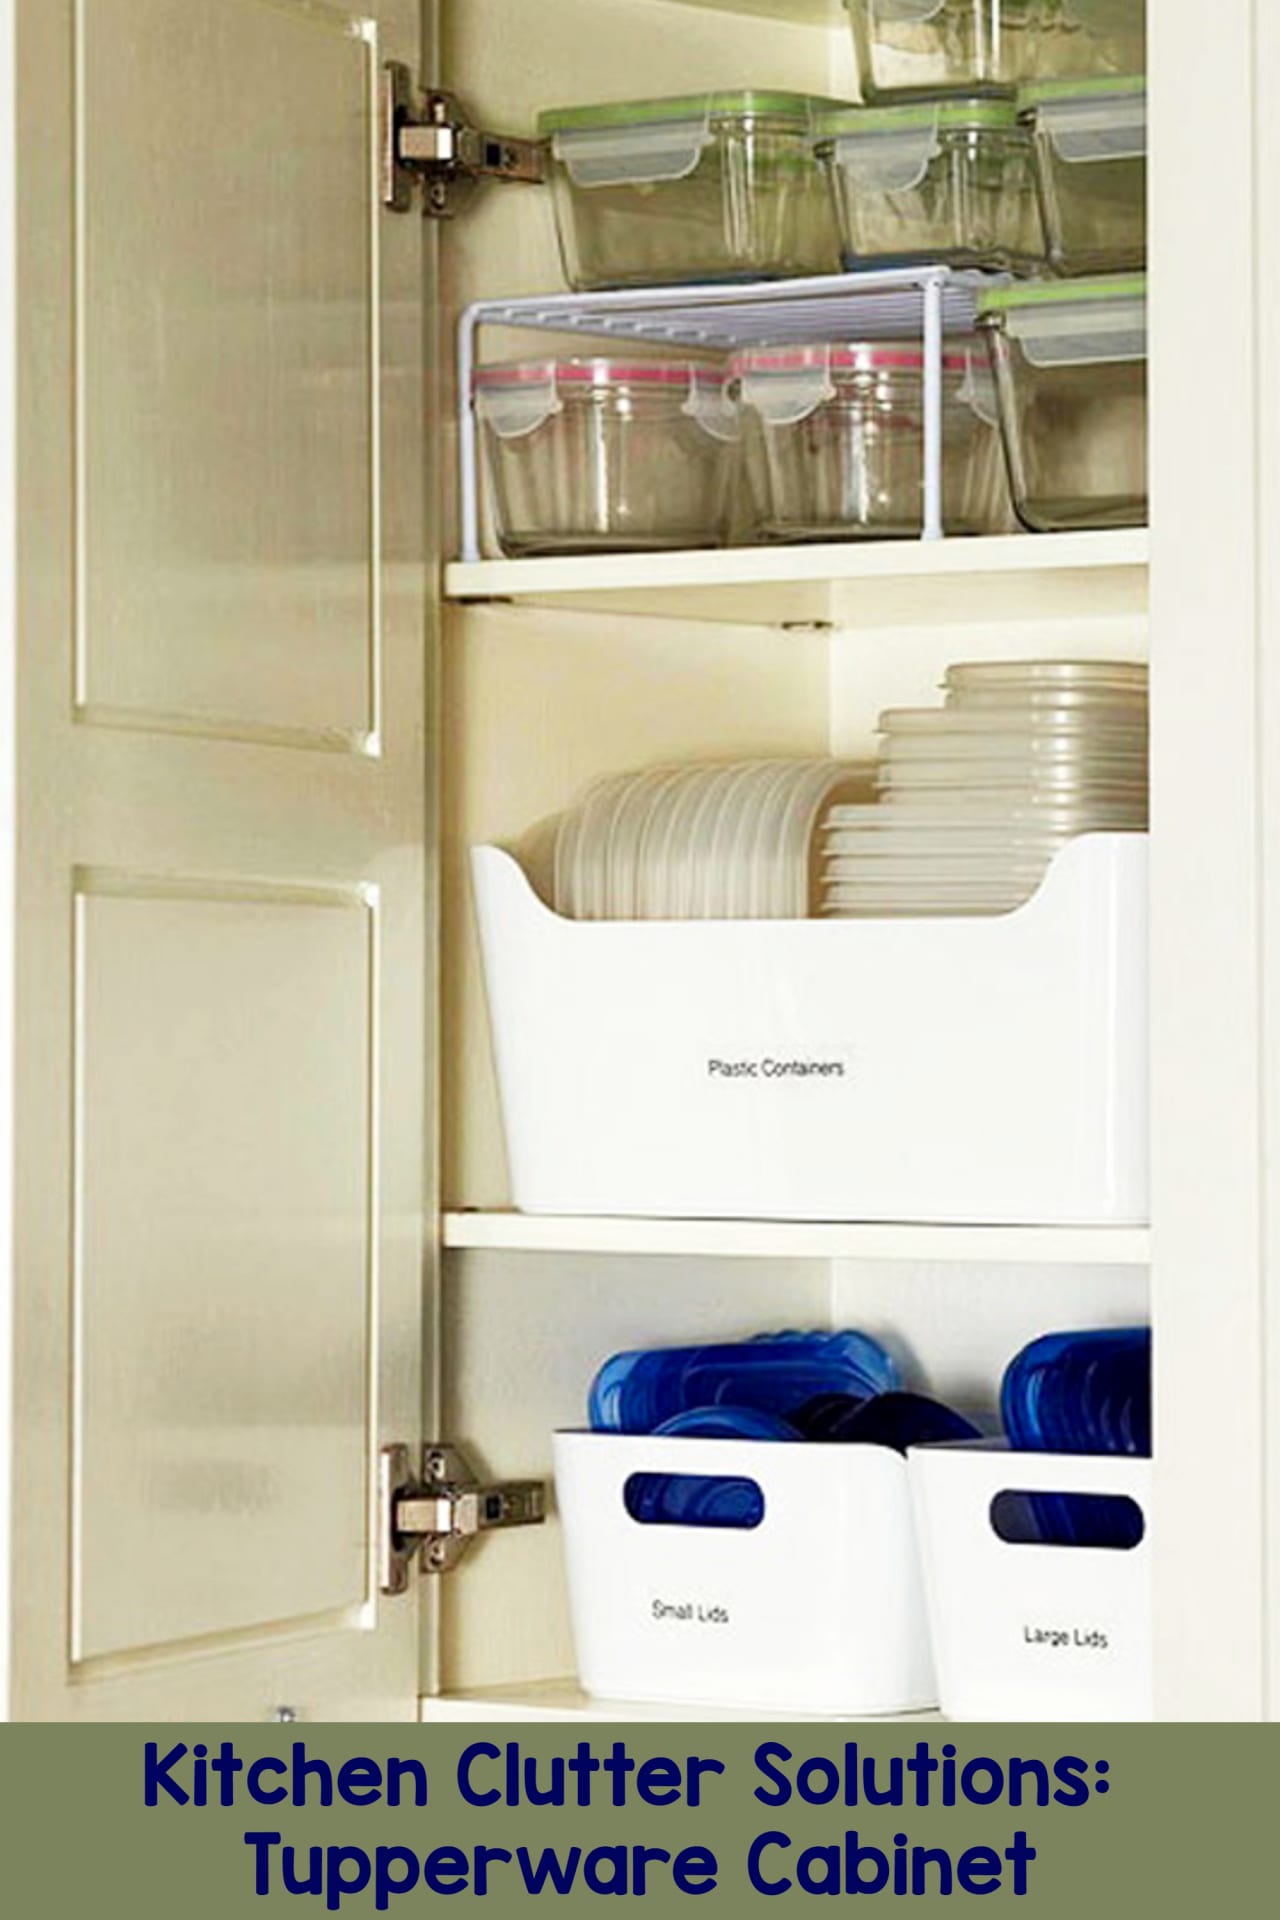 kitchen clutter solutions: declutter kitchen cabinets.  Organize your tupperware and plastic containers for an uncluttered kitchen on a budget